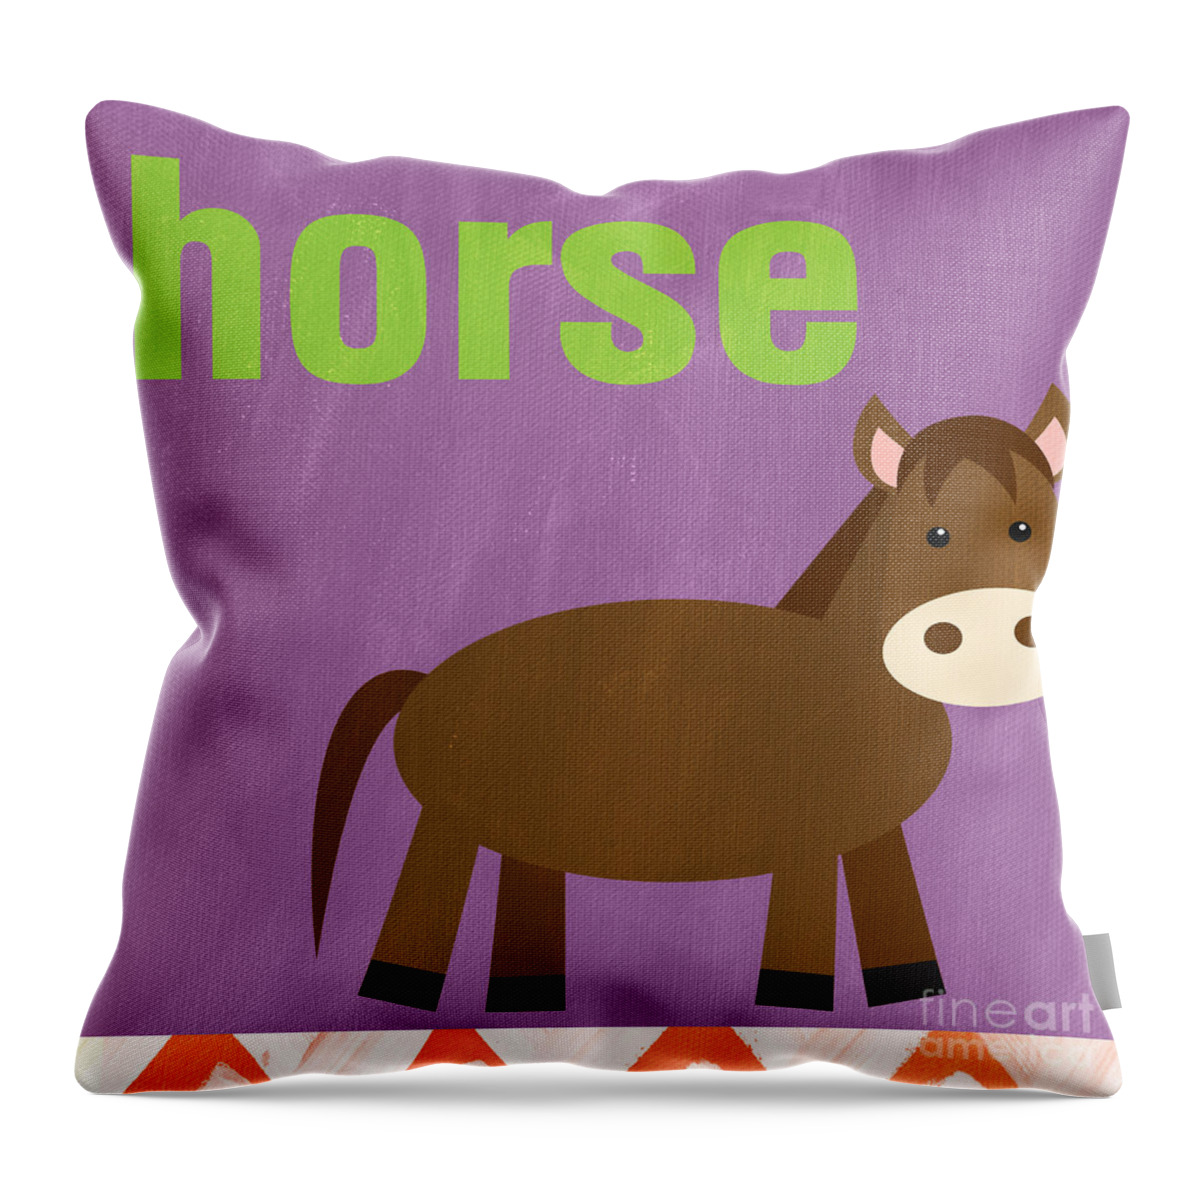 Horse Throw Pillow featuring the painting Little Horse by Linda Woods